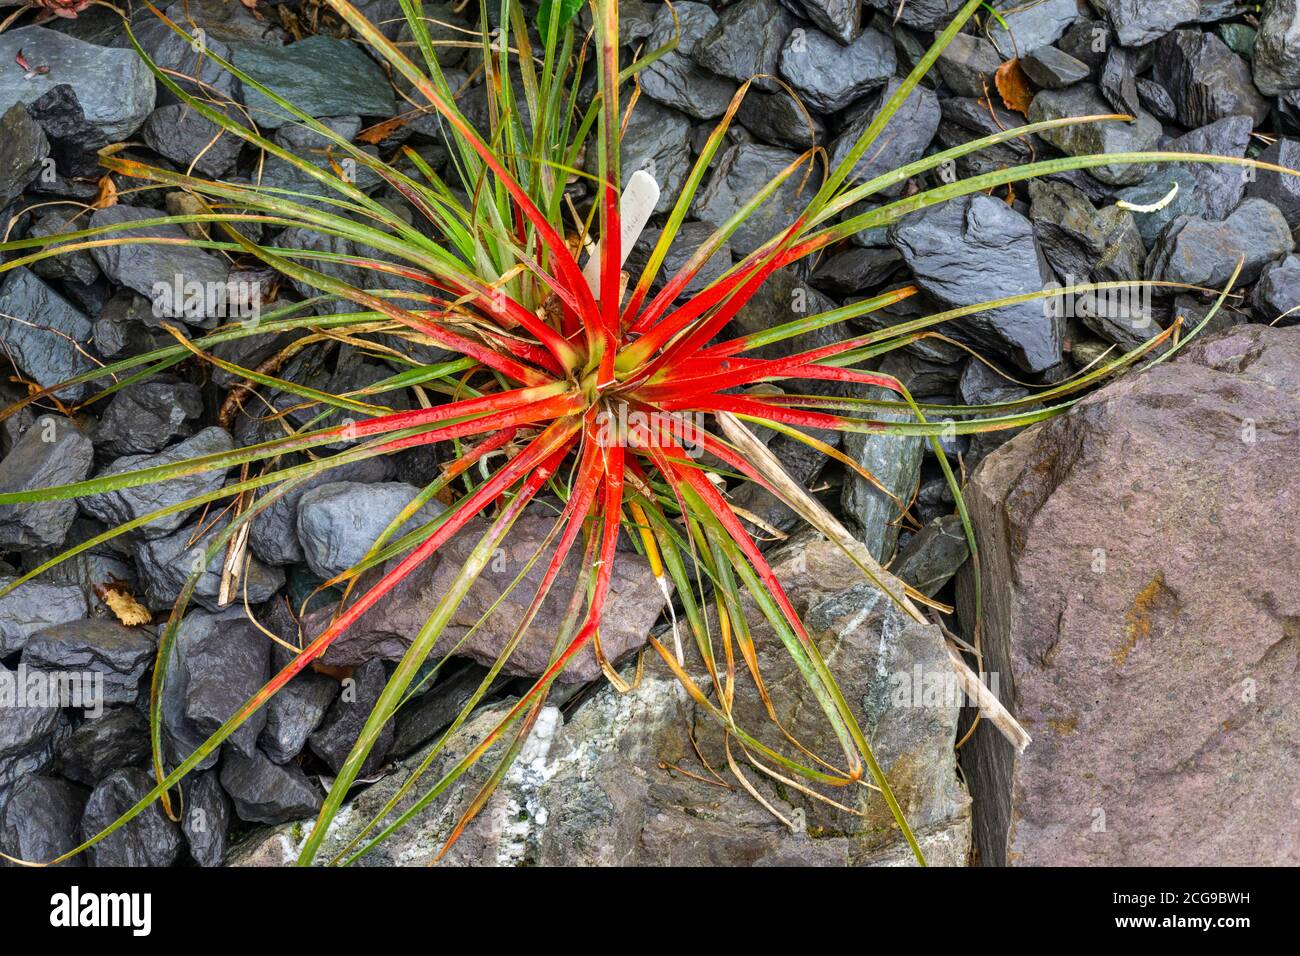 The spreading leaves of Bicolor Fascicularia, Chilean bromeliad, which turn crimson after flowering. It can take five years to develop a central cup. Stock Photo